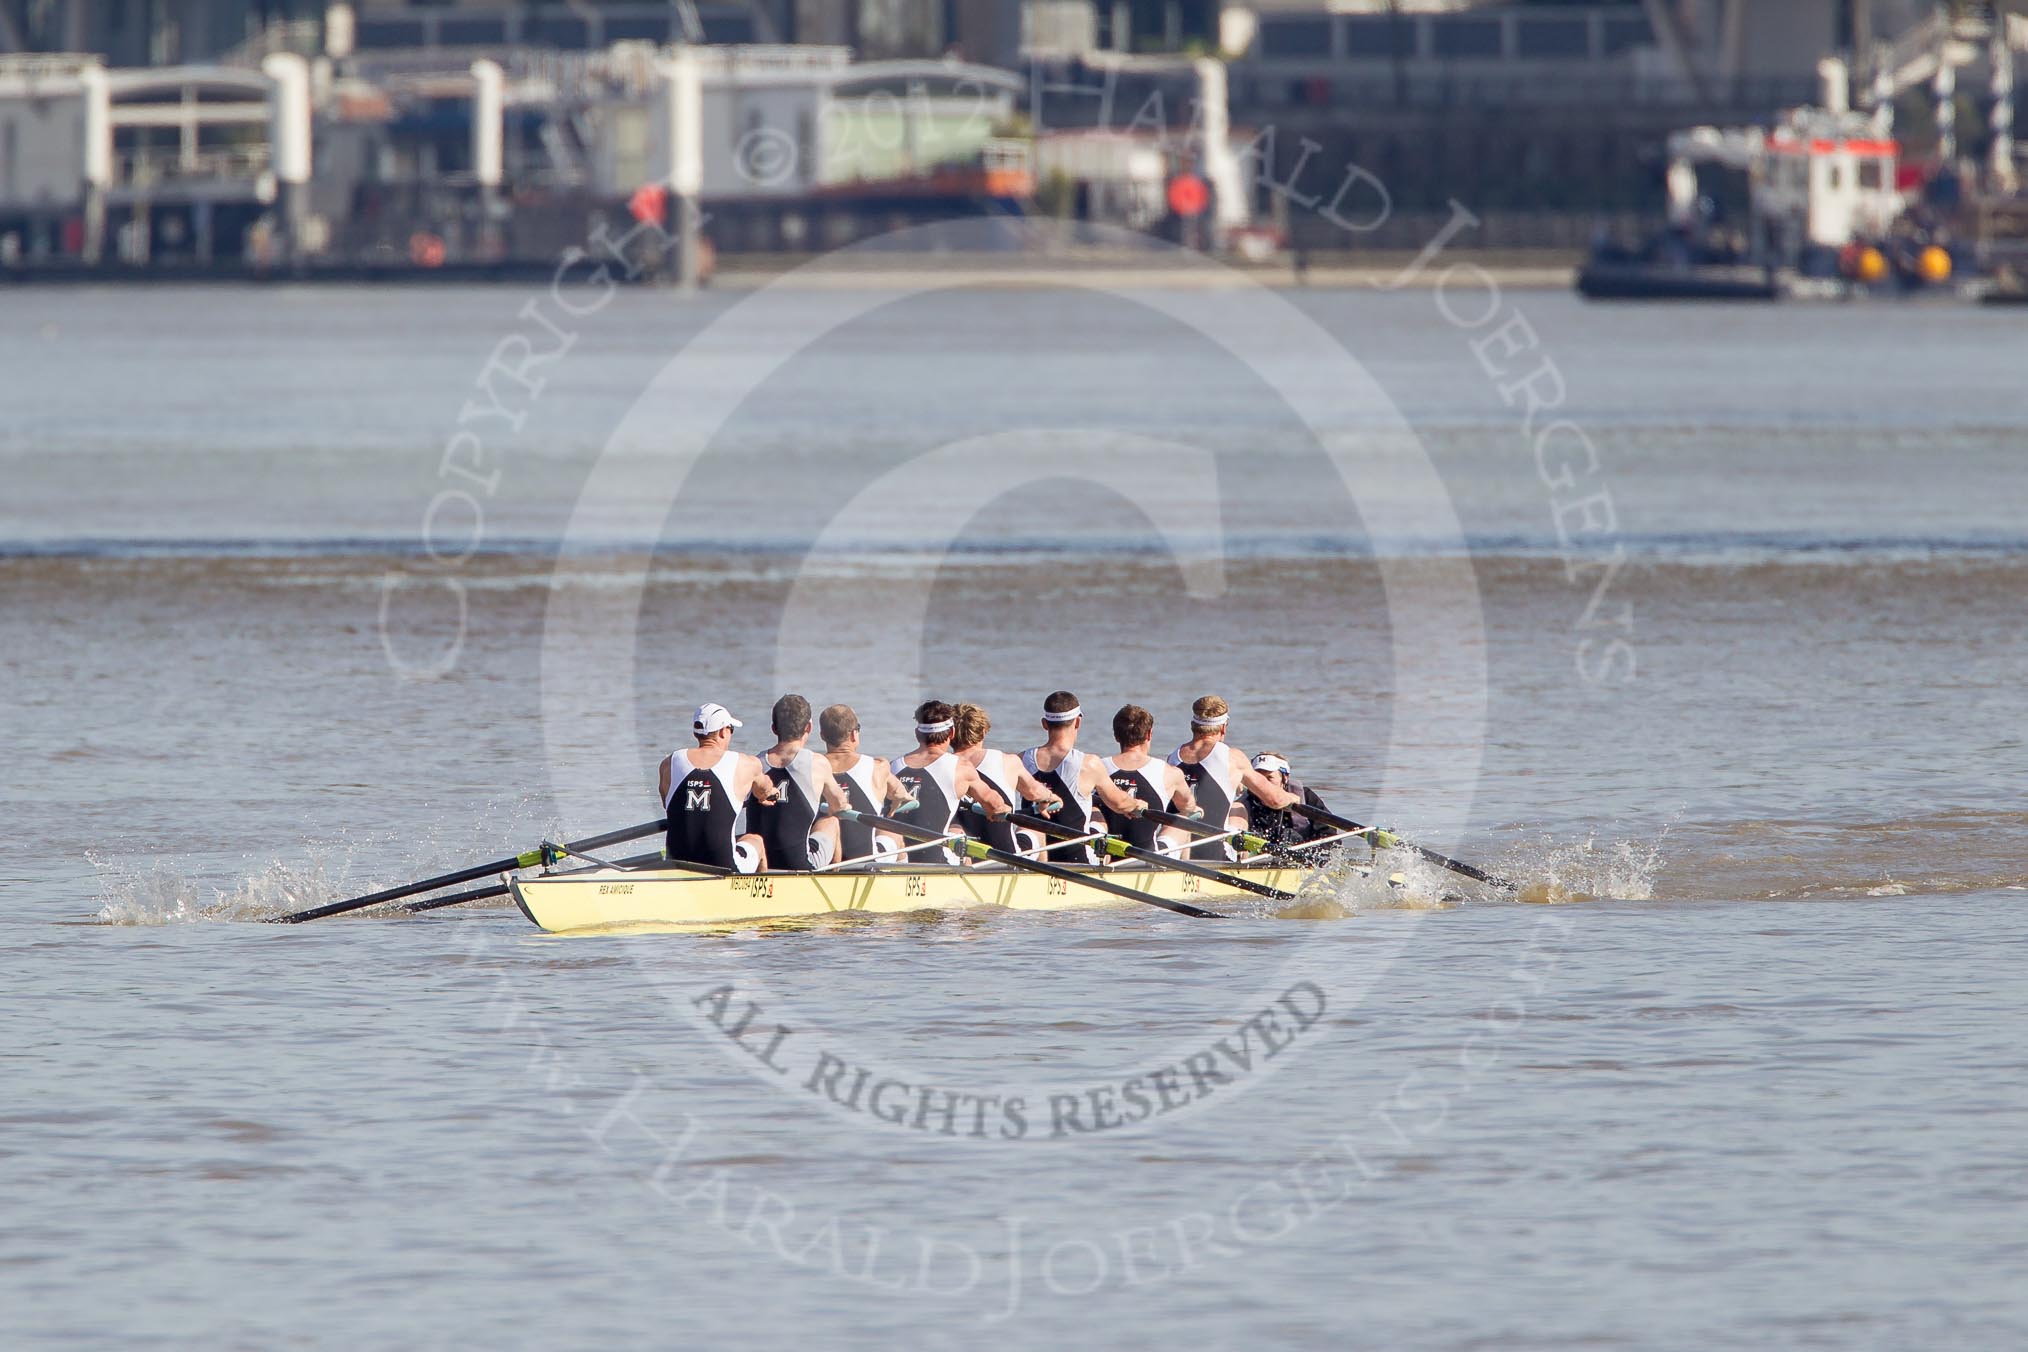 The Boat Race season 2012 - fixture CUBC vs Molesey BC.




on 25 March 2012 at 15:18, image #104